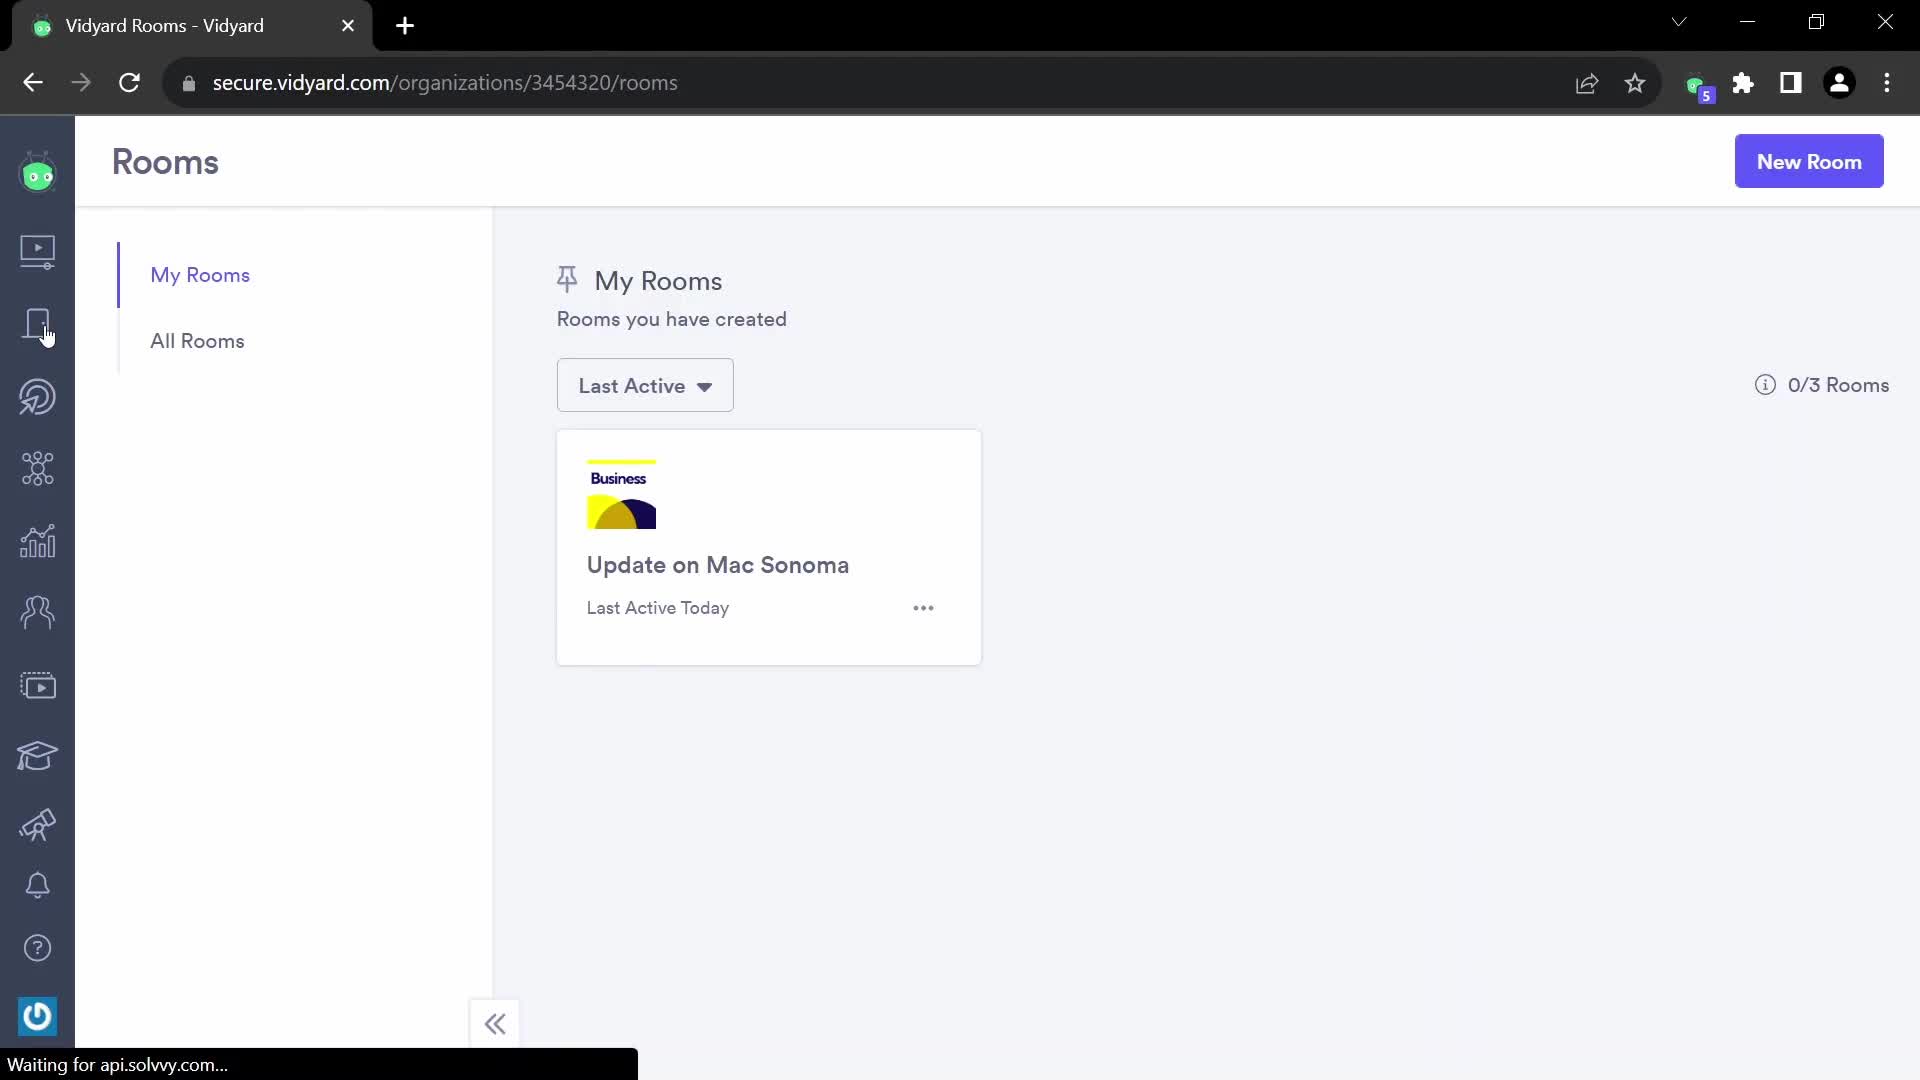 Screenshot of Rooms on Commenting on Vidyard user flow